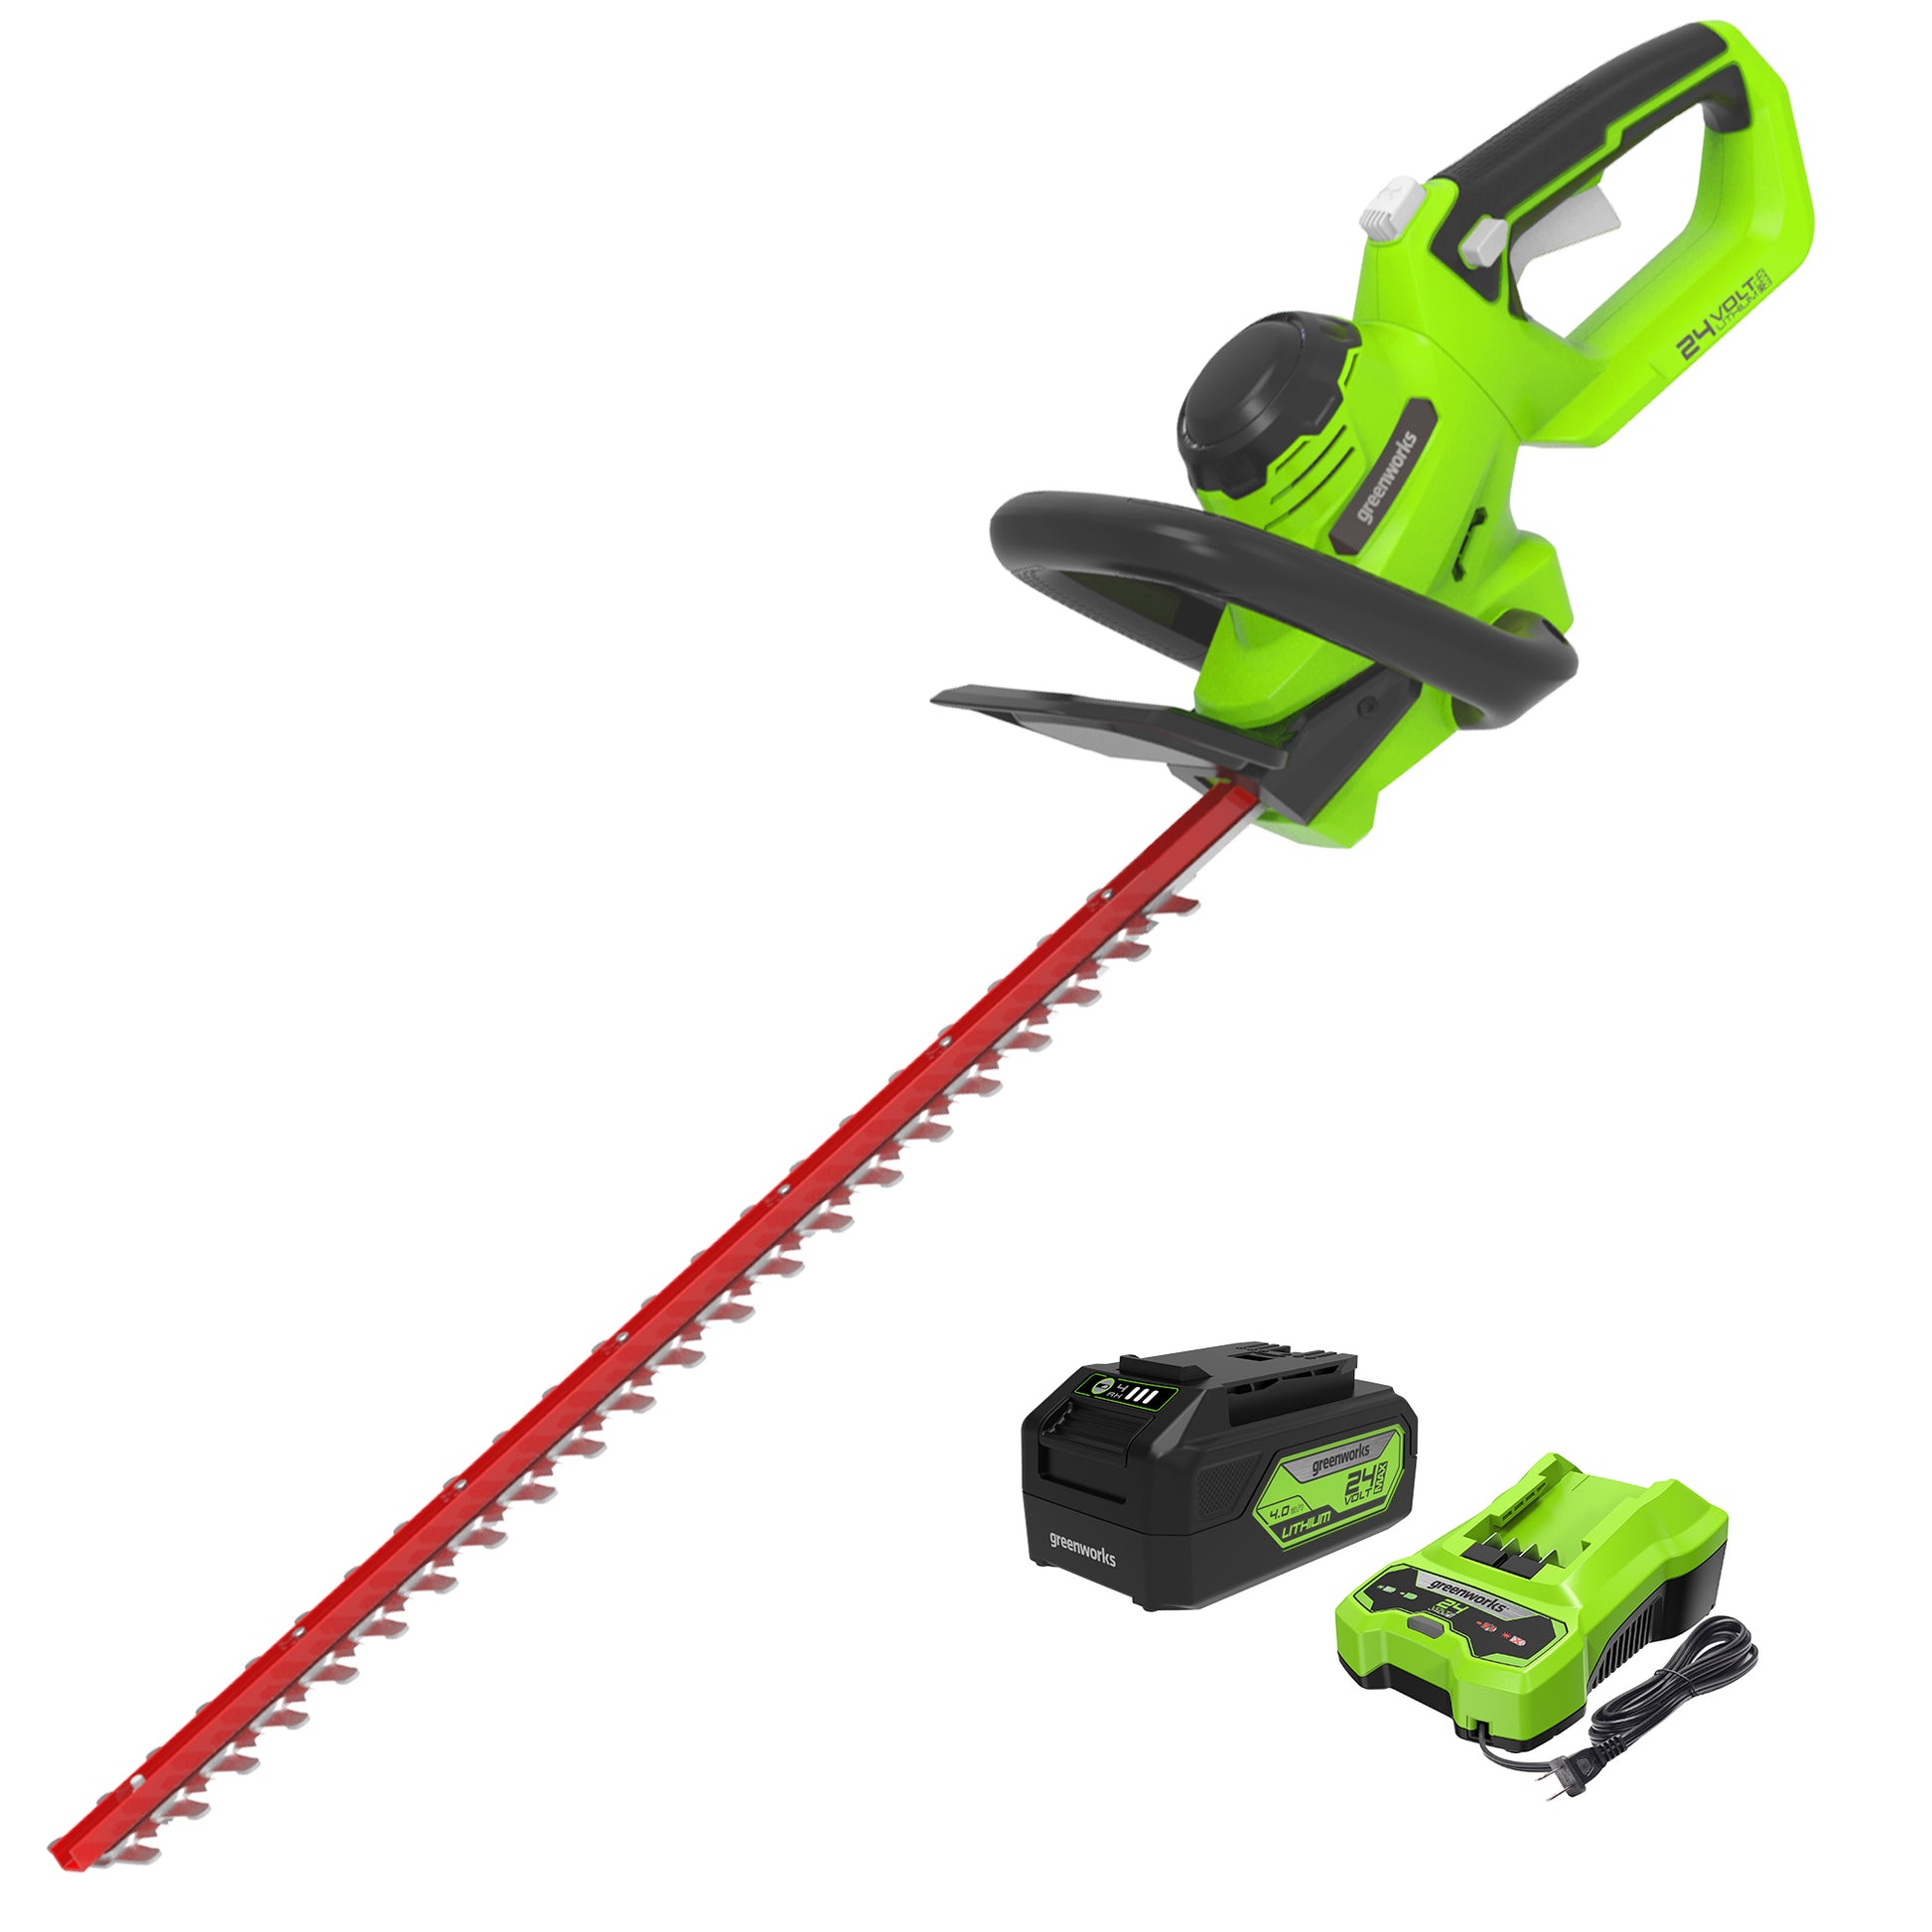 22in black decker electric hedge trimmer - tools - by owner - sale